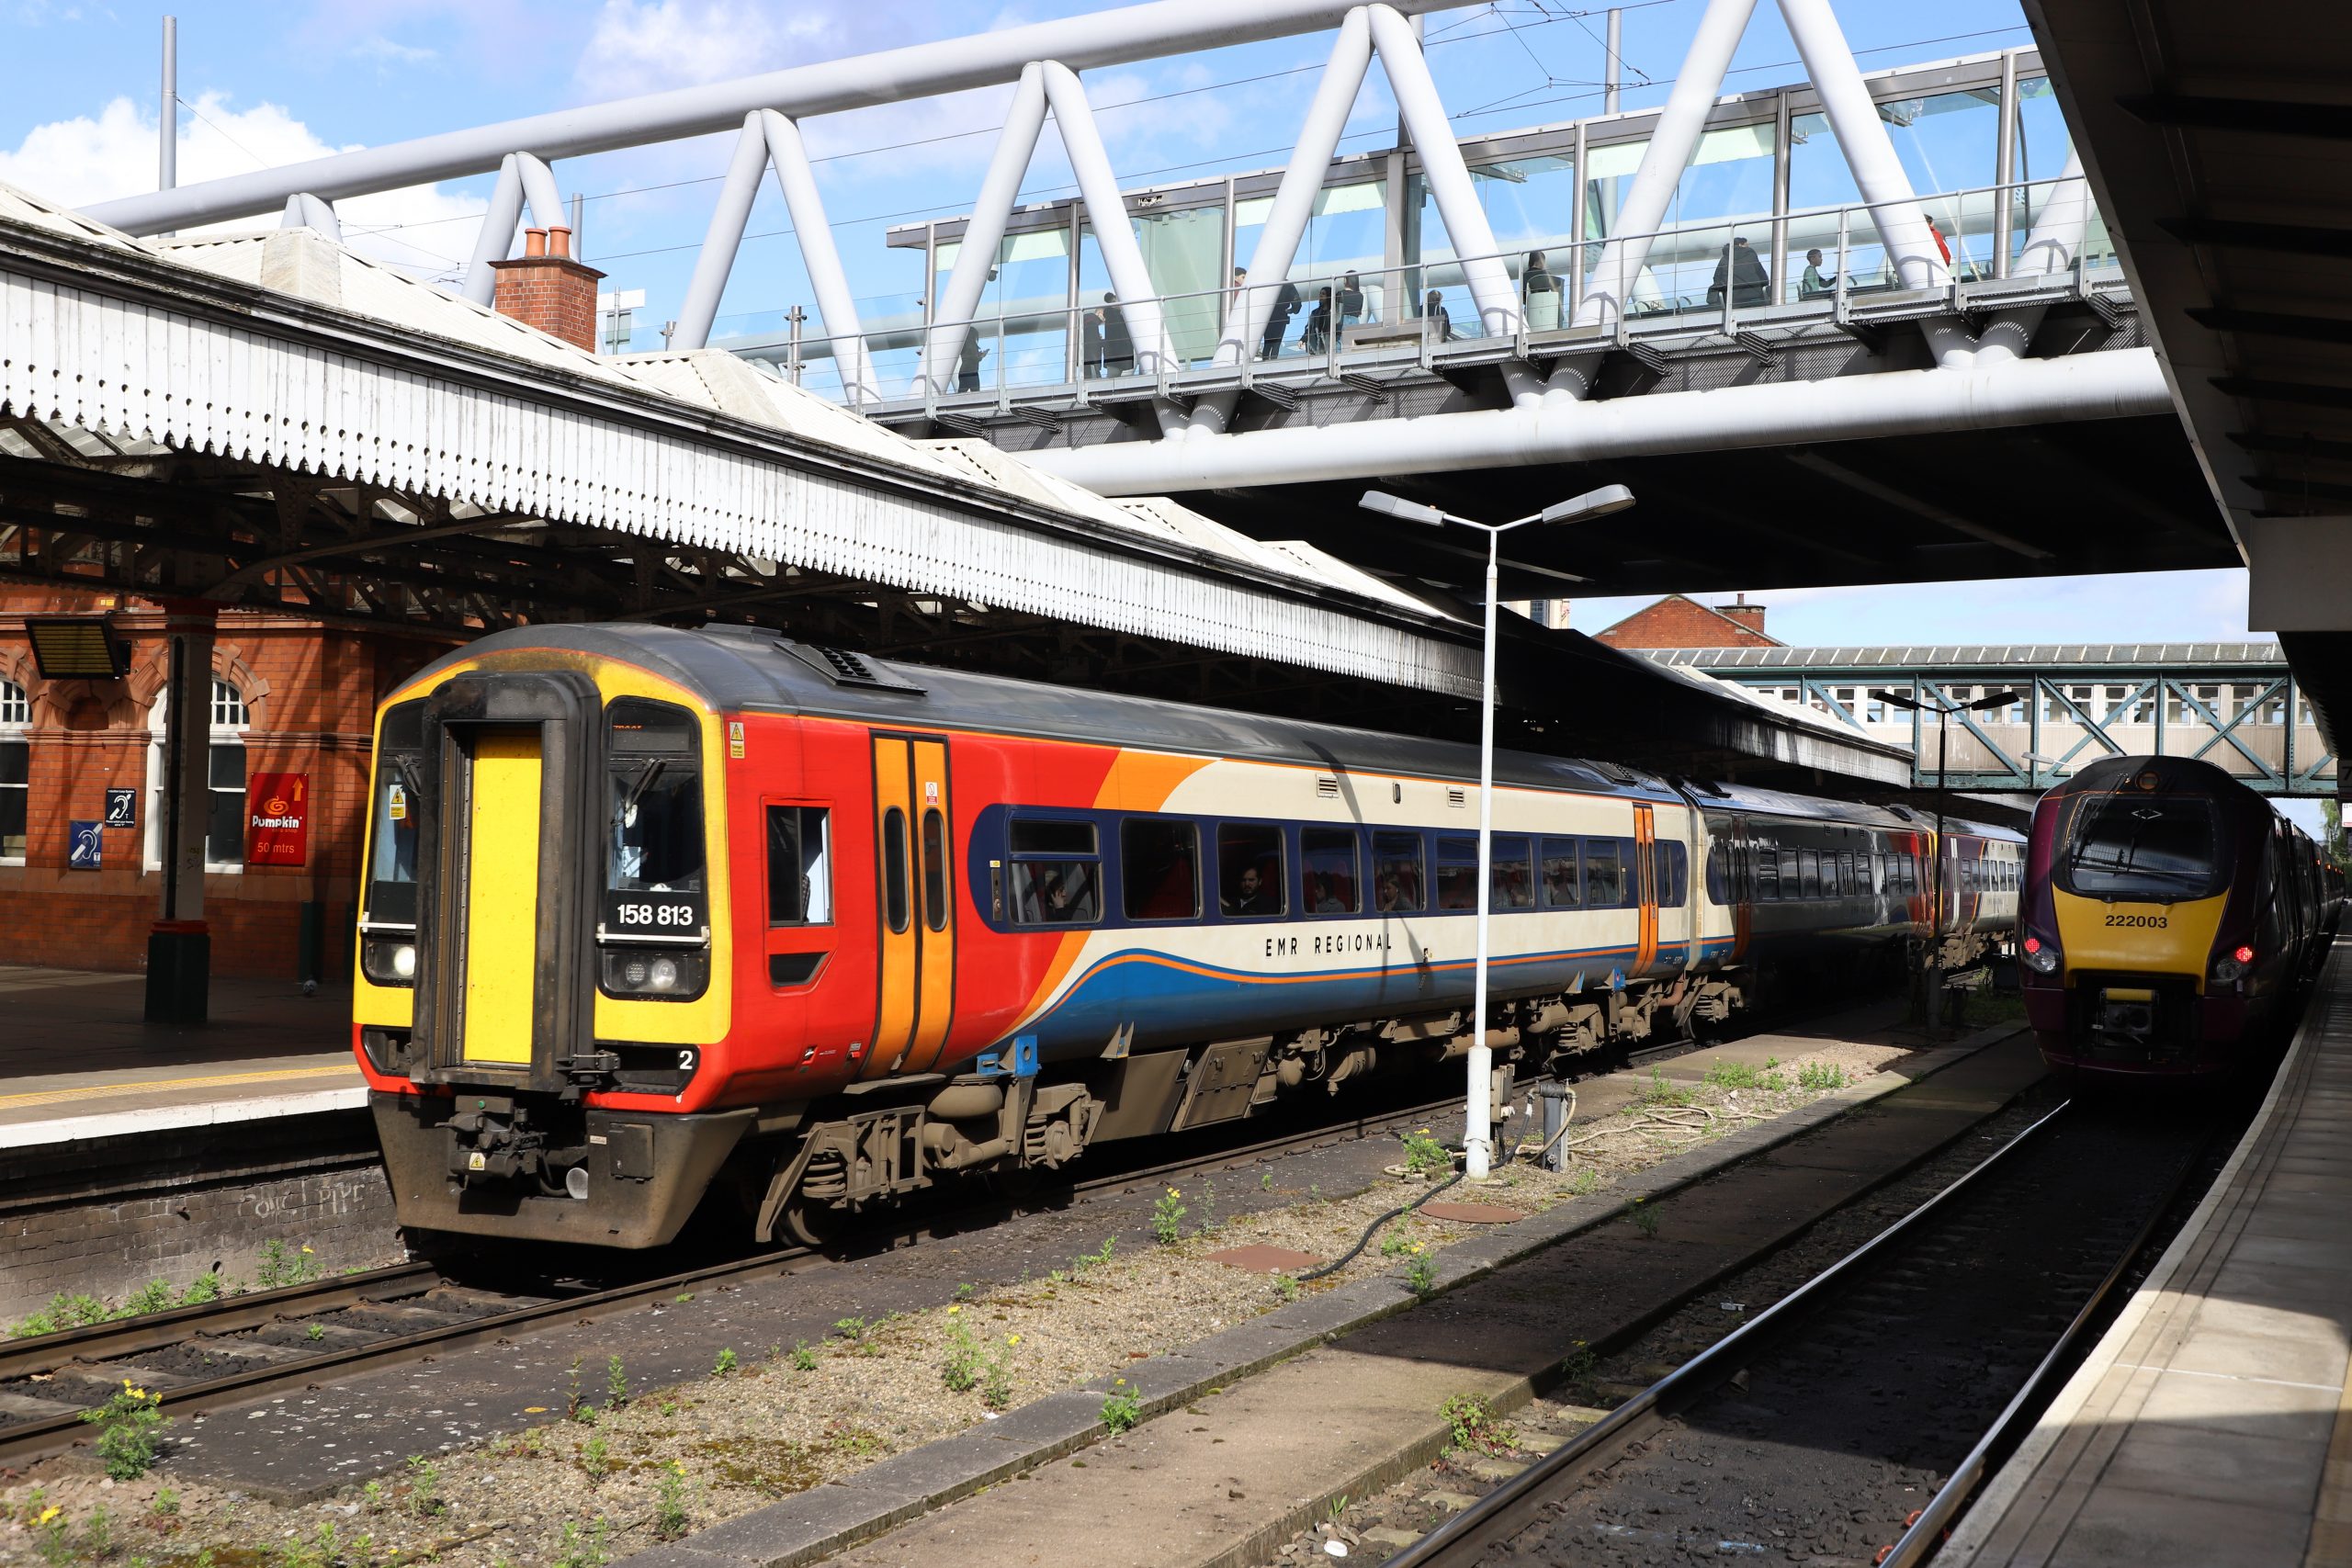 Units 158813 & 158773 leaving Nottingham at 15:50 with the 12:56 service from Norwich to Liverpool; on the right is unit 222003 with the 15:50 service to St Pancras : Image credit - Brian Roberts